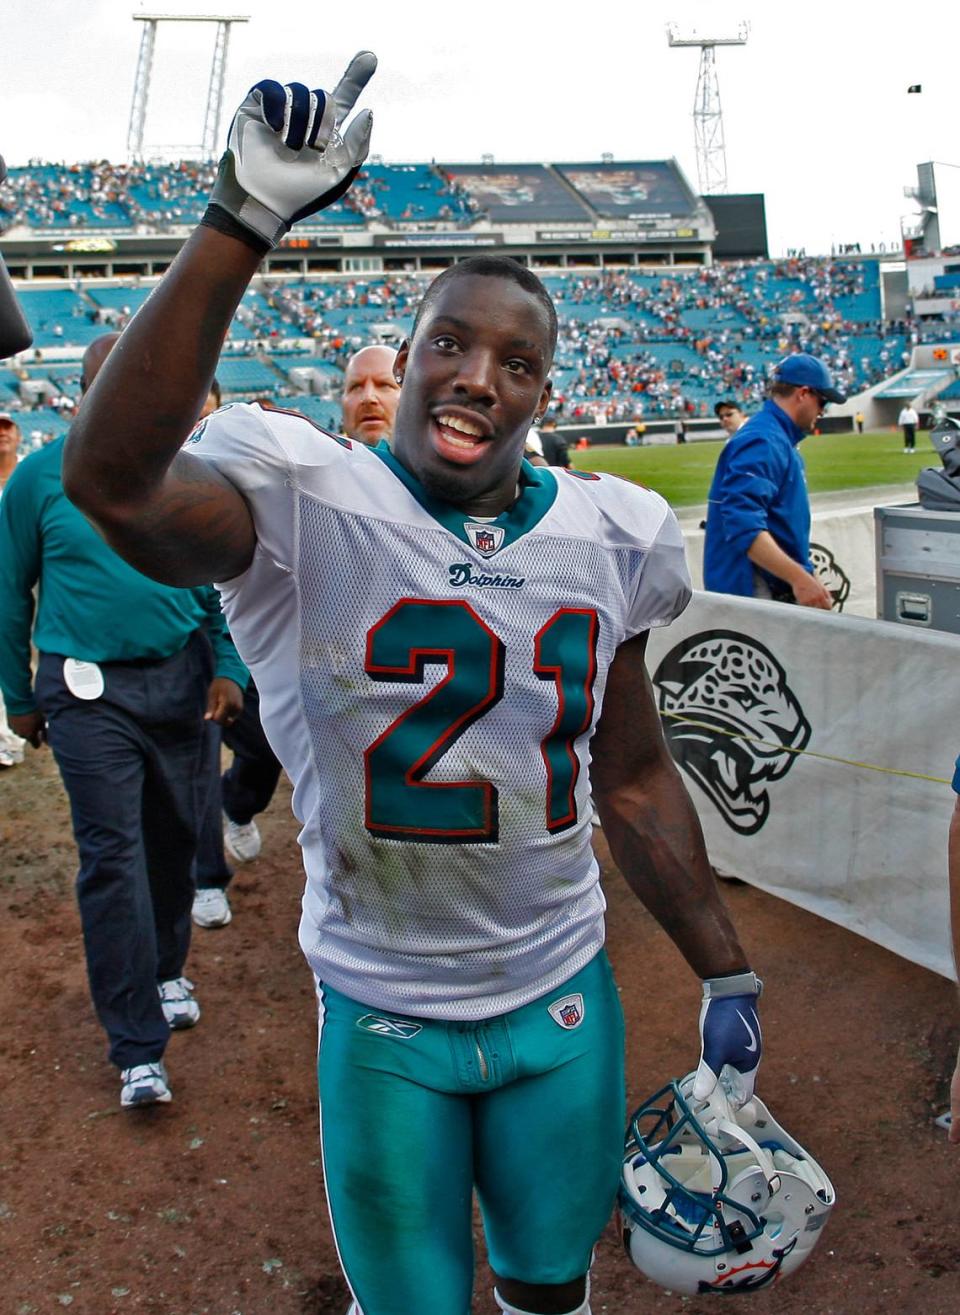 The Miami Dolphins’ cornerback Vontae Davis is all smiles after a game against the Jacksonville Jaguars at Municipal Staium in Jacksonville onDecember 13,2009 ....JOE RIMKUS JR. / MIAMI HERALD STAFF